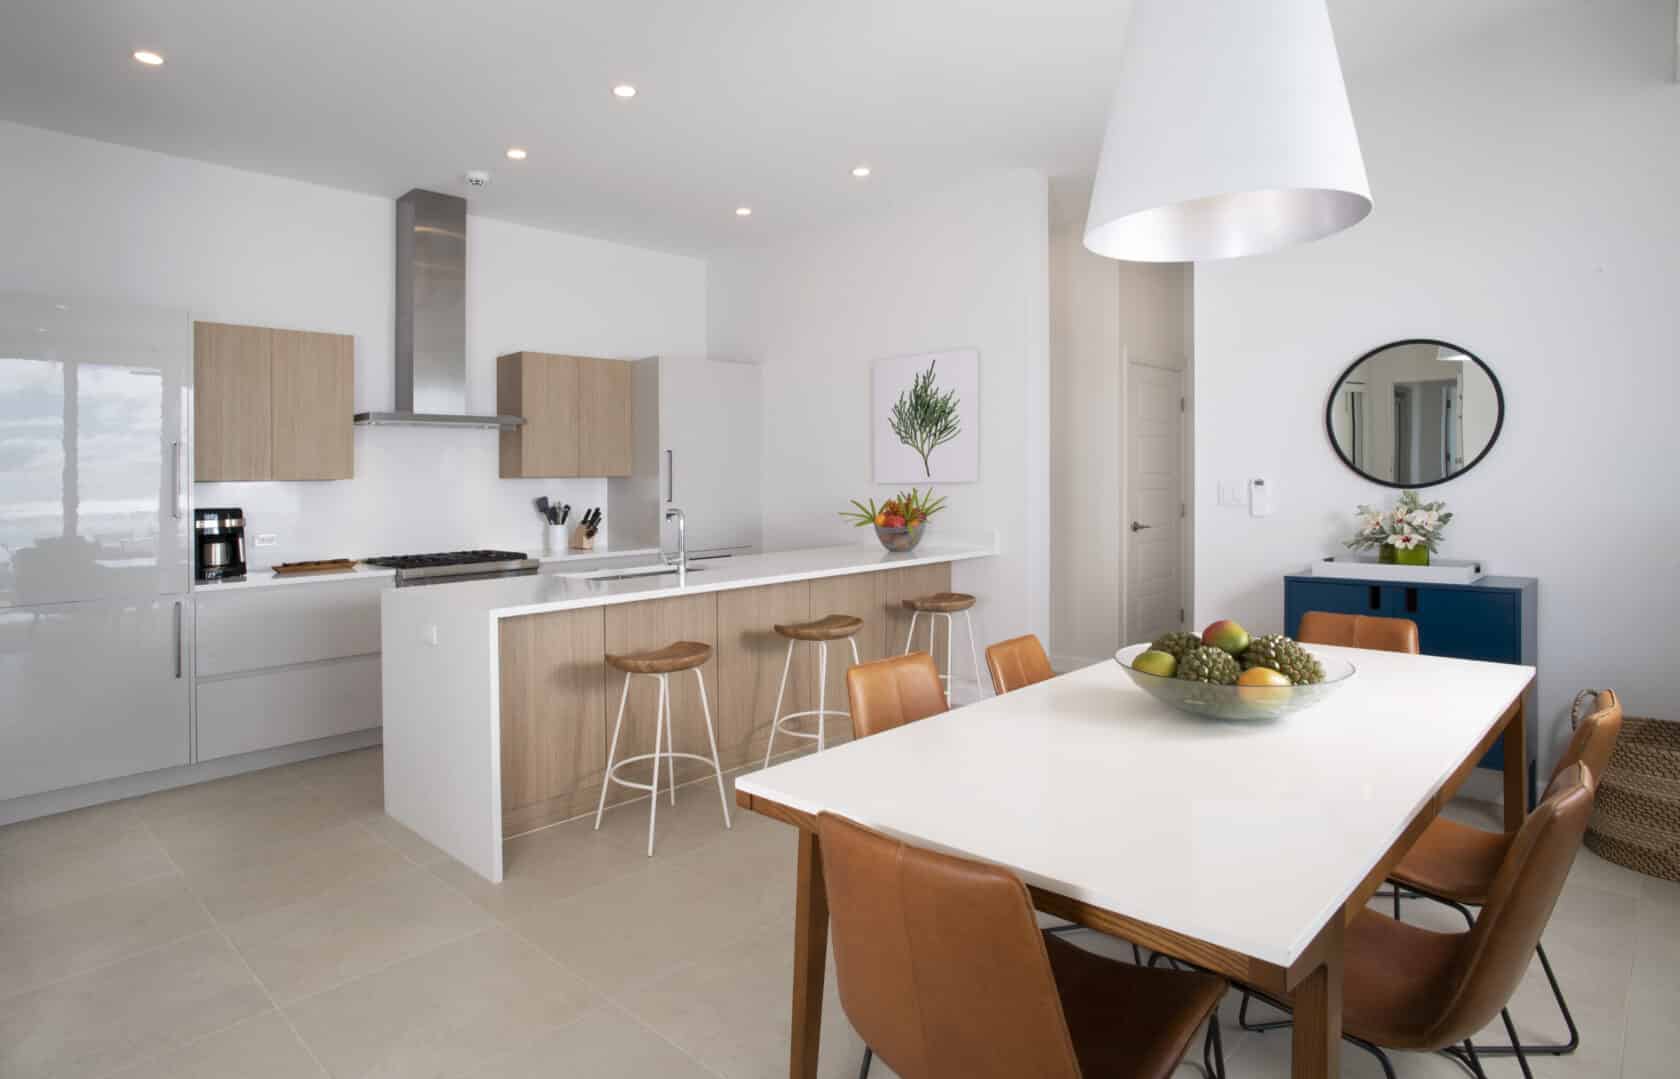 A white kitchen at the Bermuda Residences with a dining table and chairs.